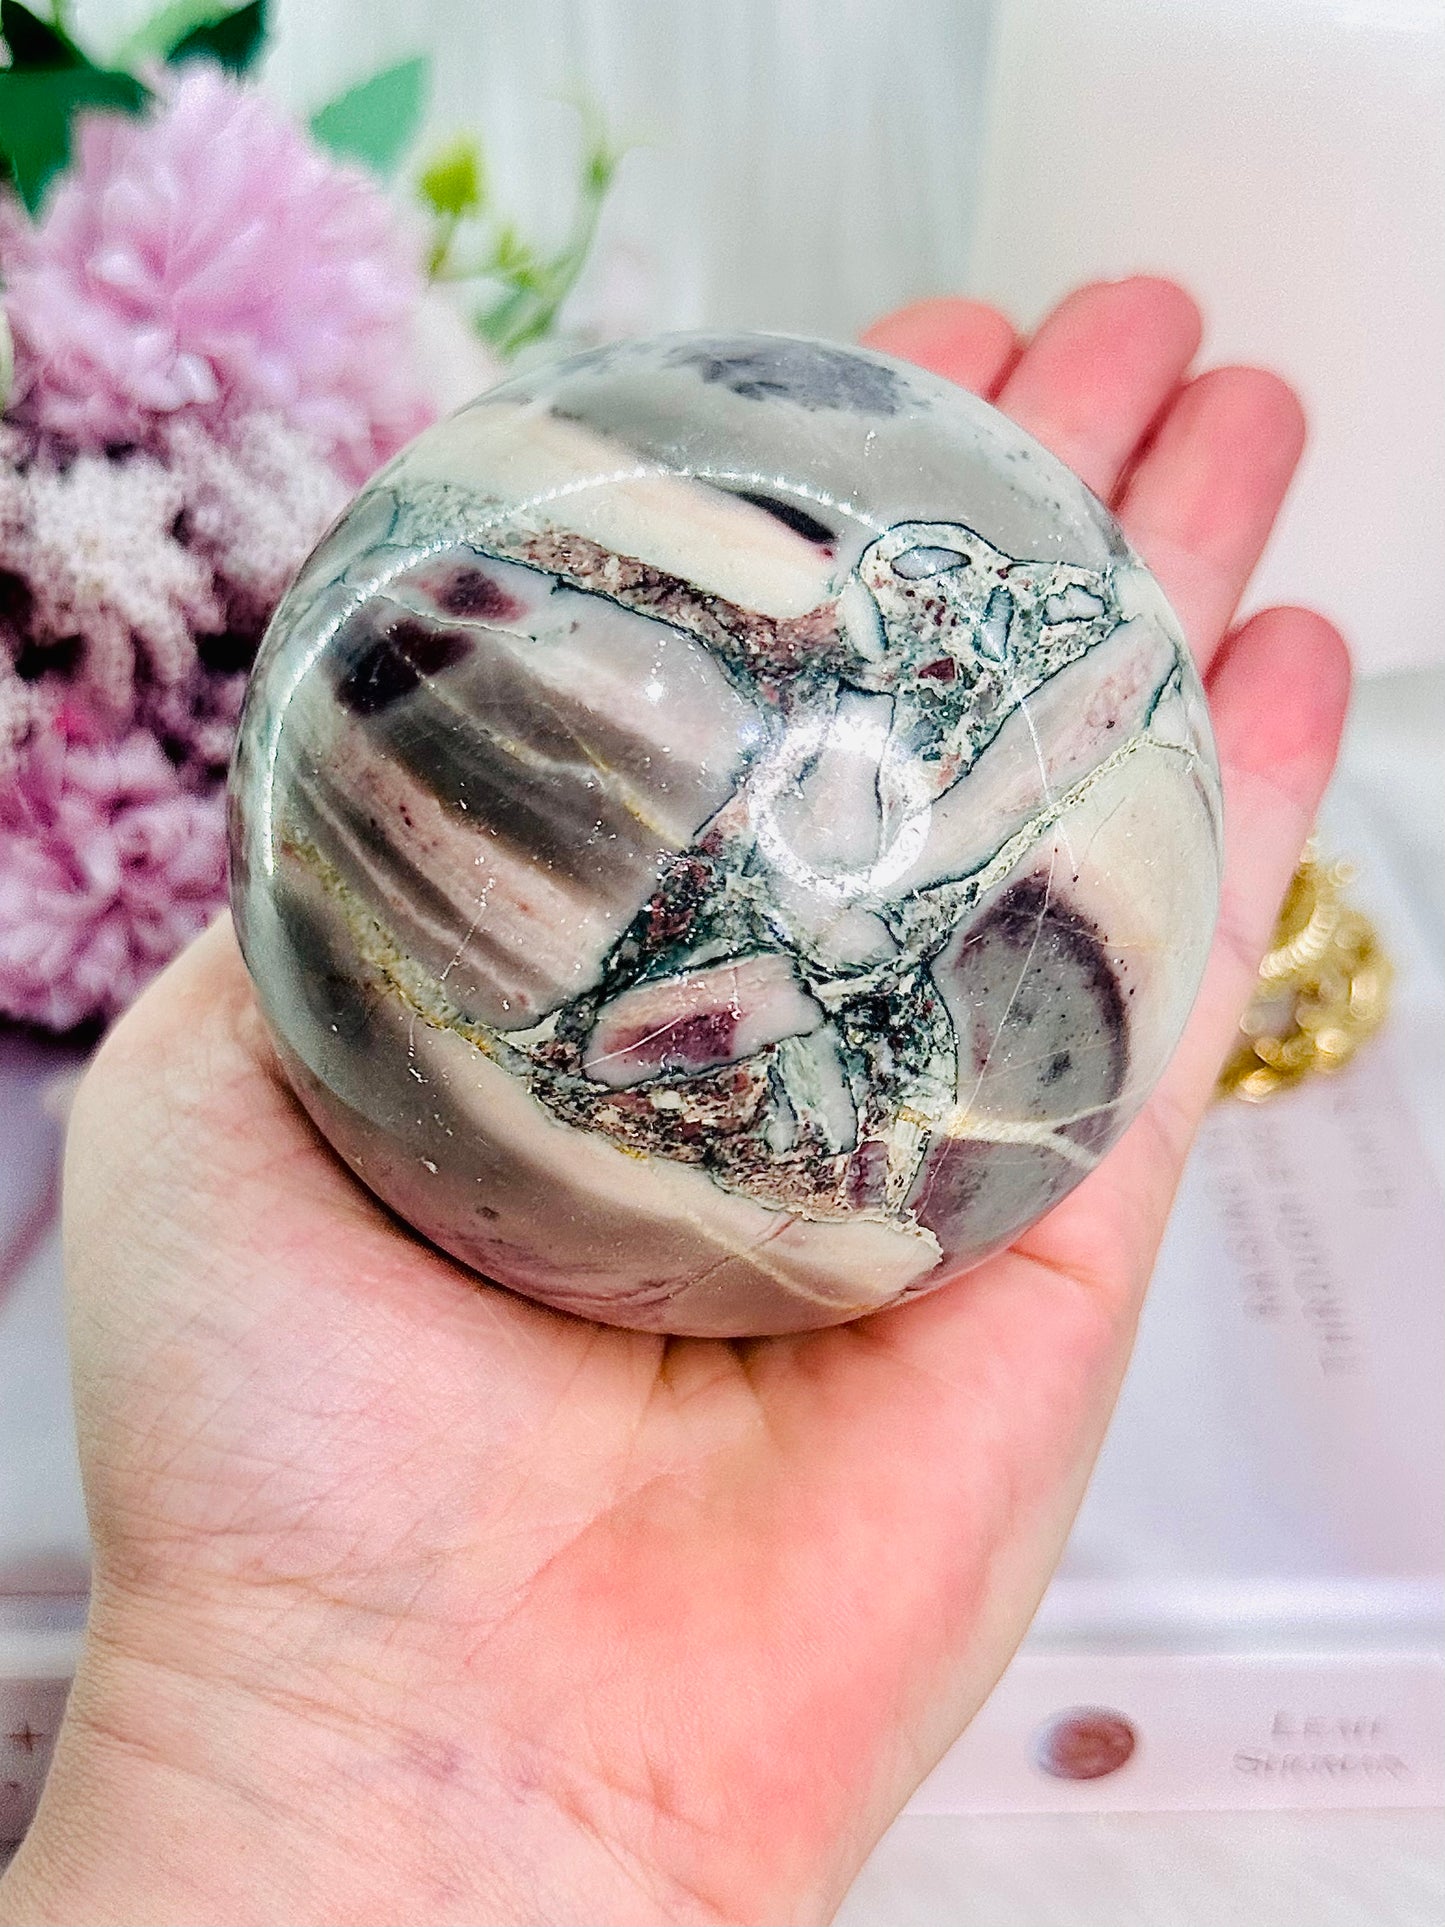 Incredible Large Opalised Fluorite Sphere with A Mosaic Effect 698grams Comes On Stand (Glass stand in pic is display only)